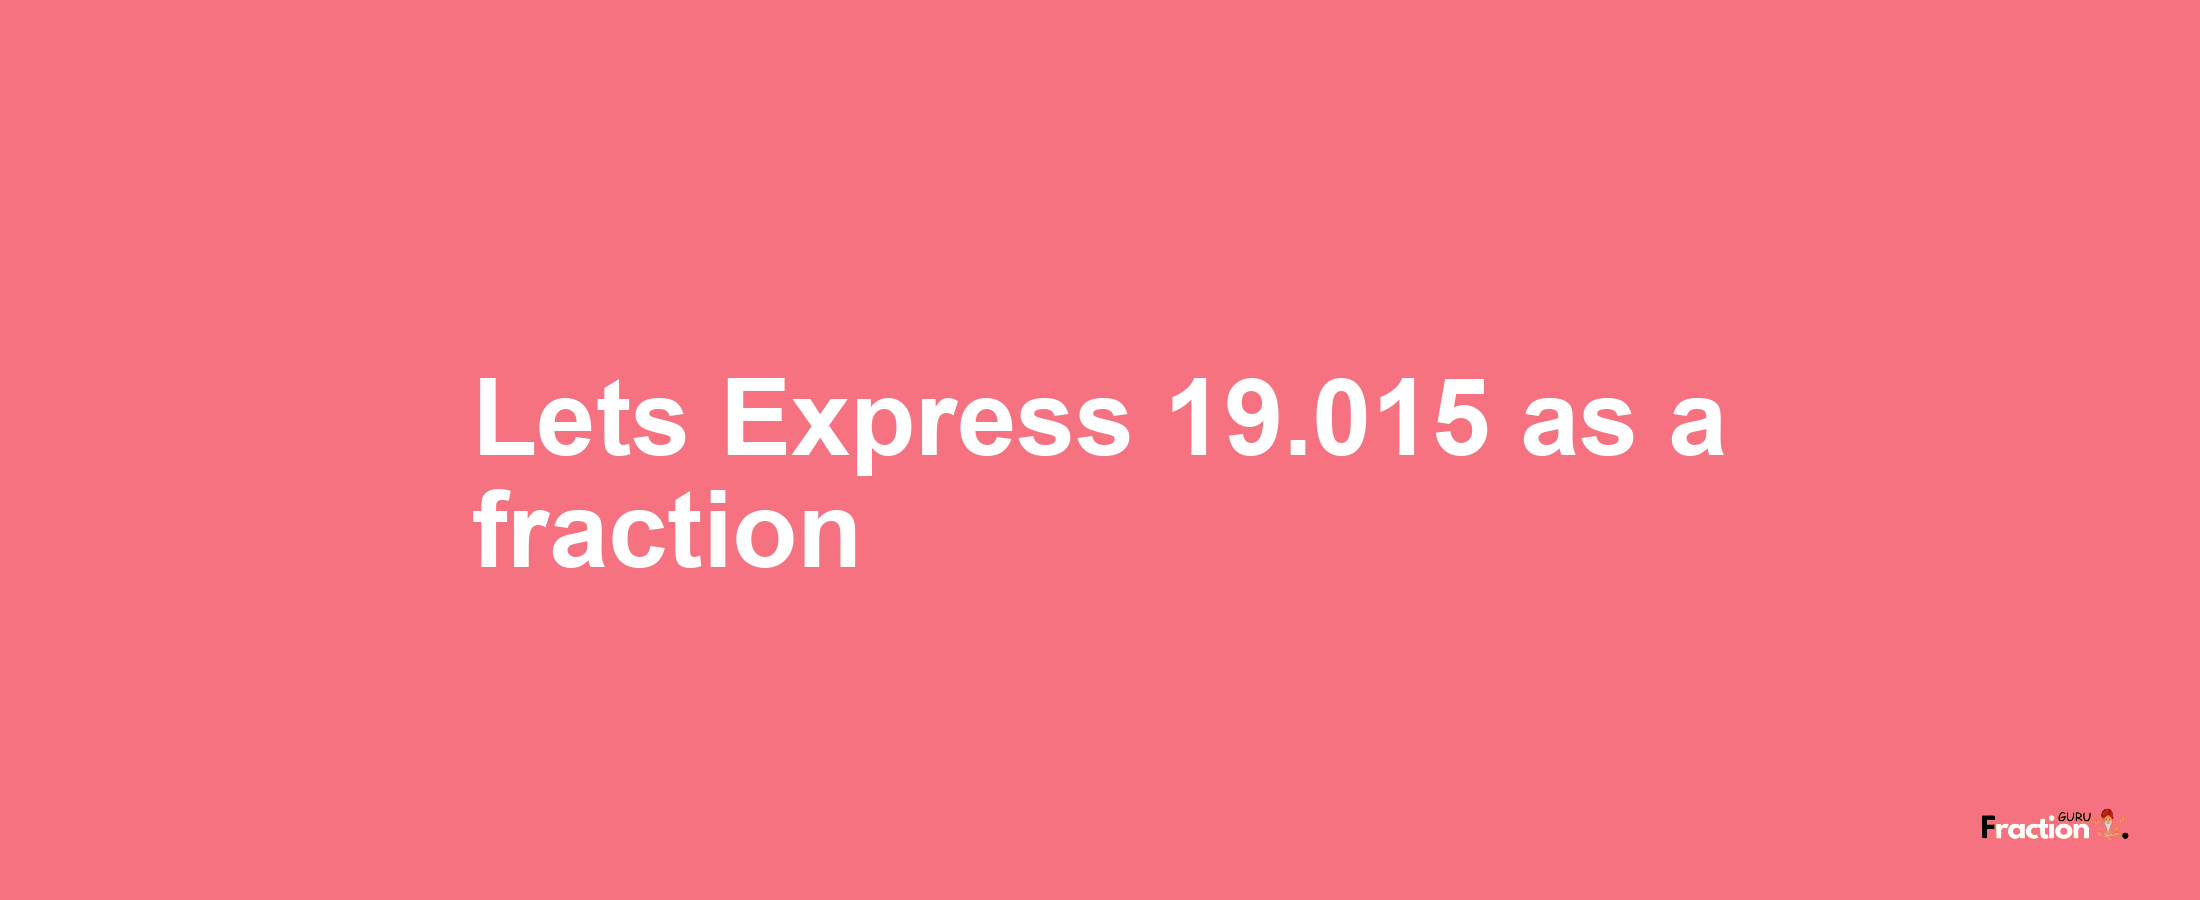 Lets Express 19.015 as afraction